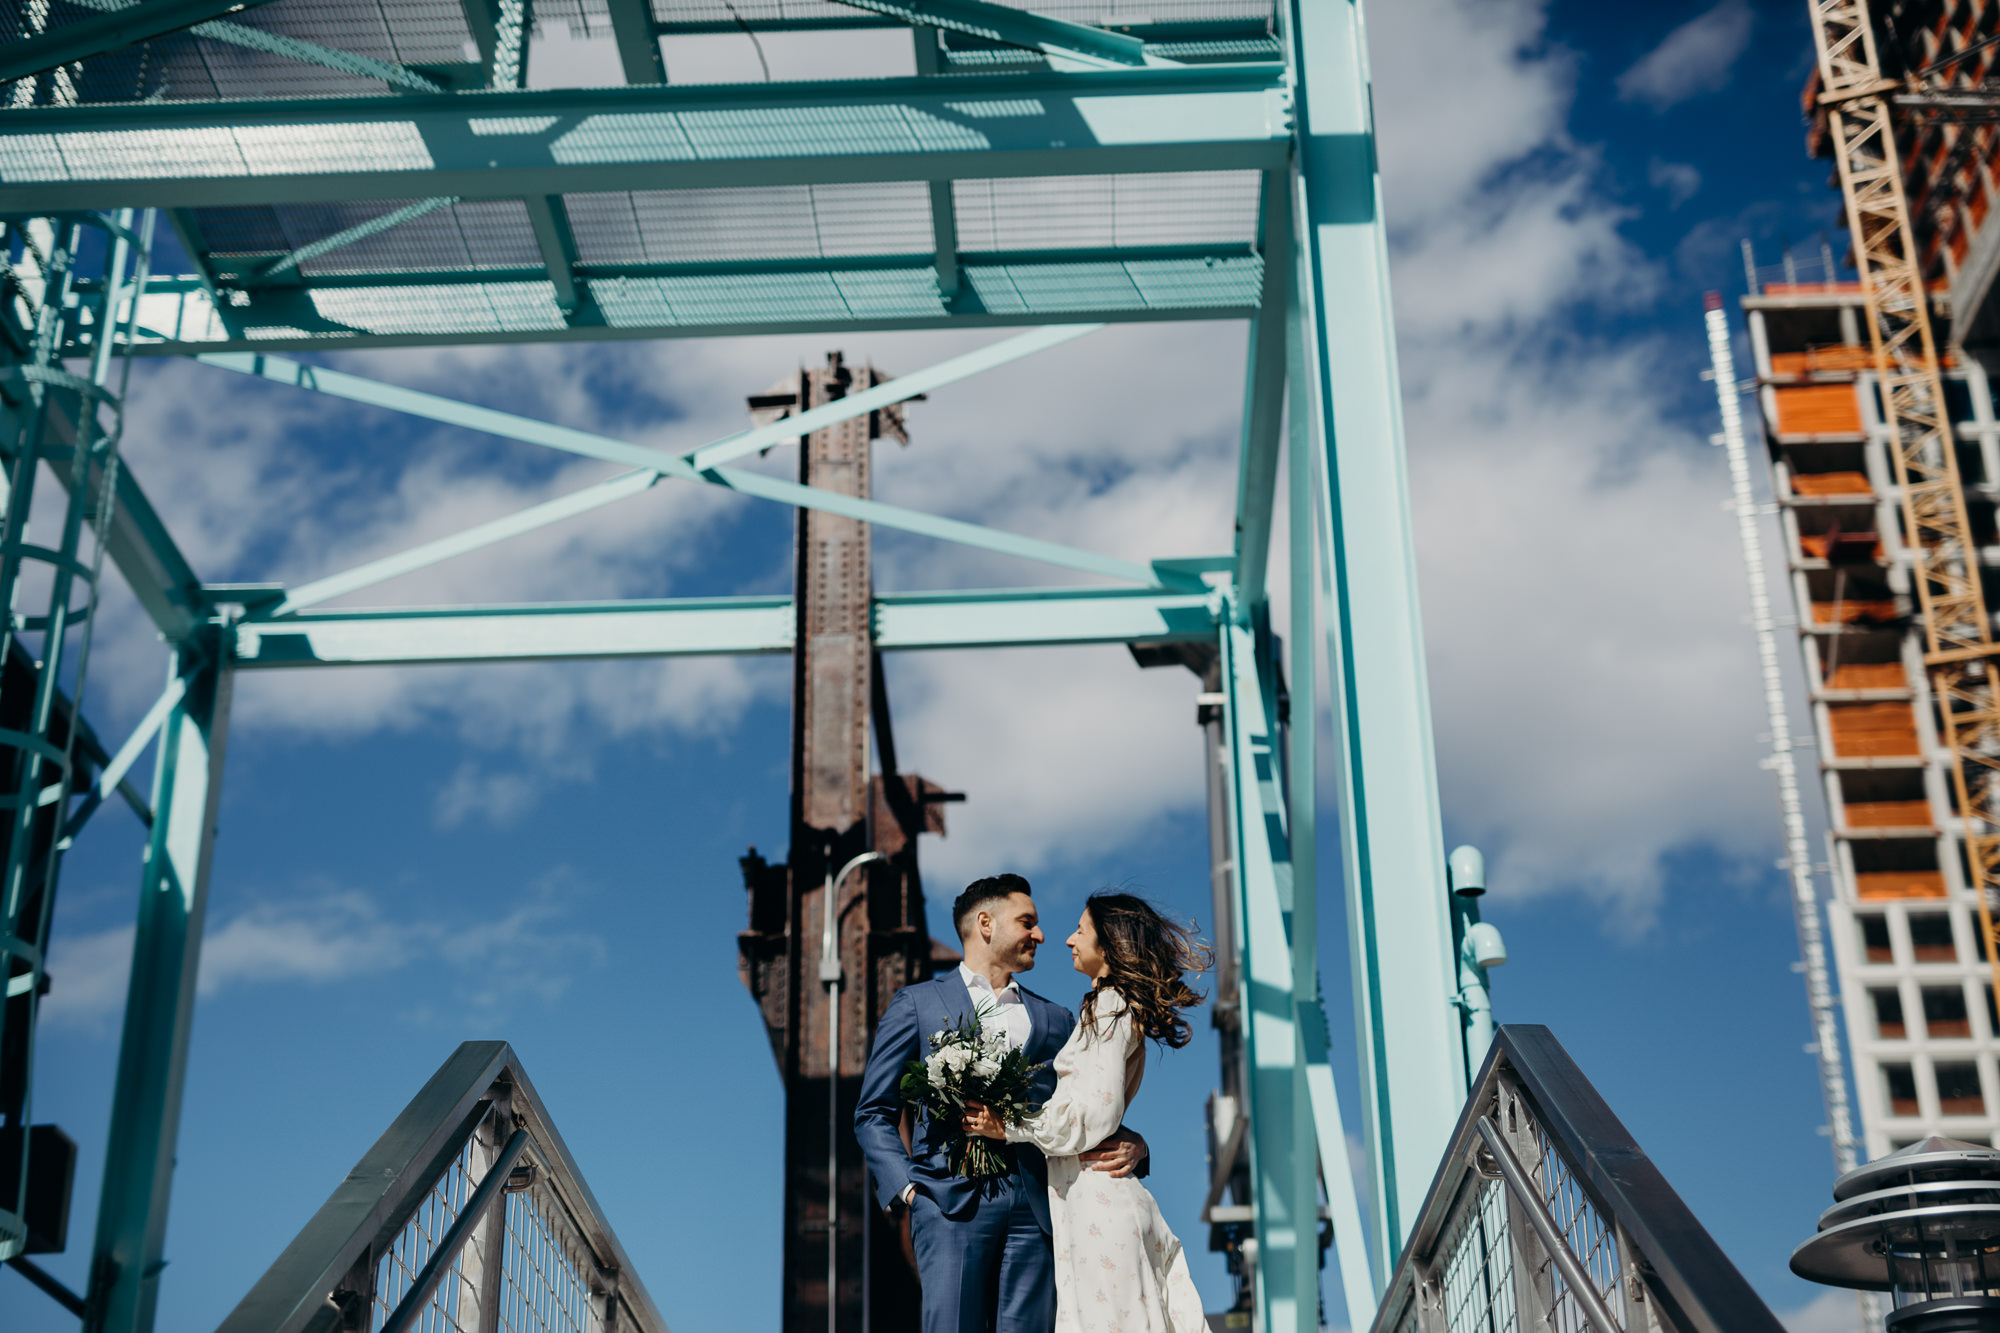 portrait of a bride and groom on their wedding day at domino park in brooklyn, ny